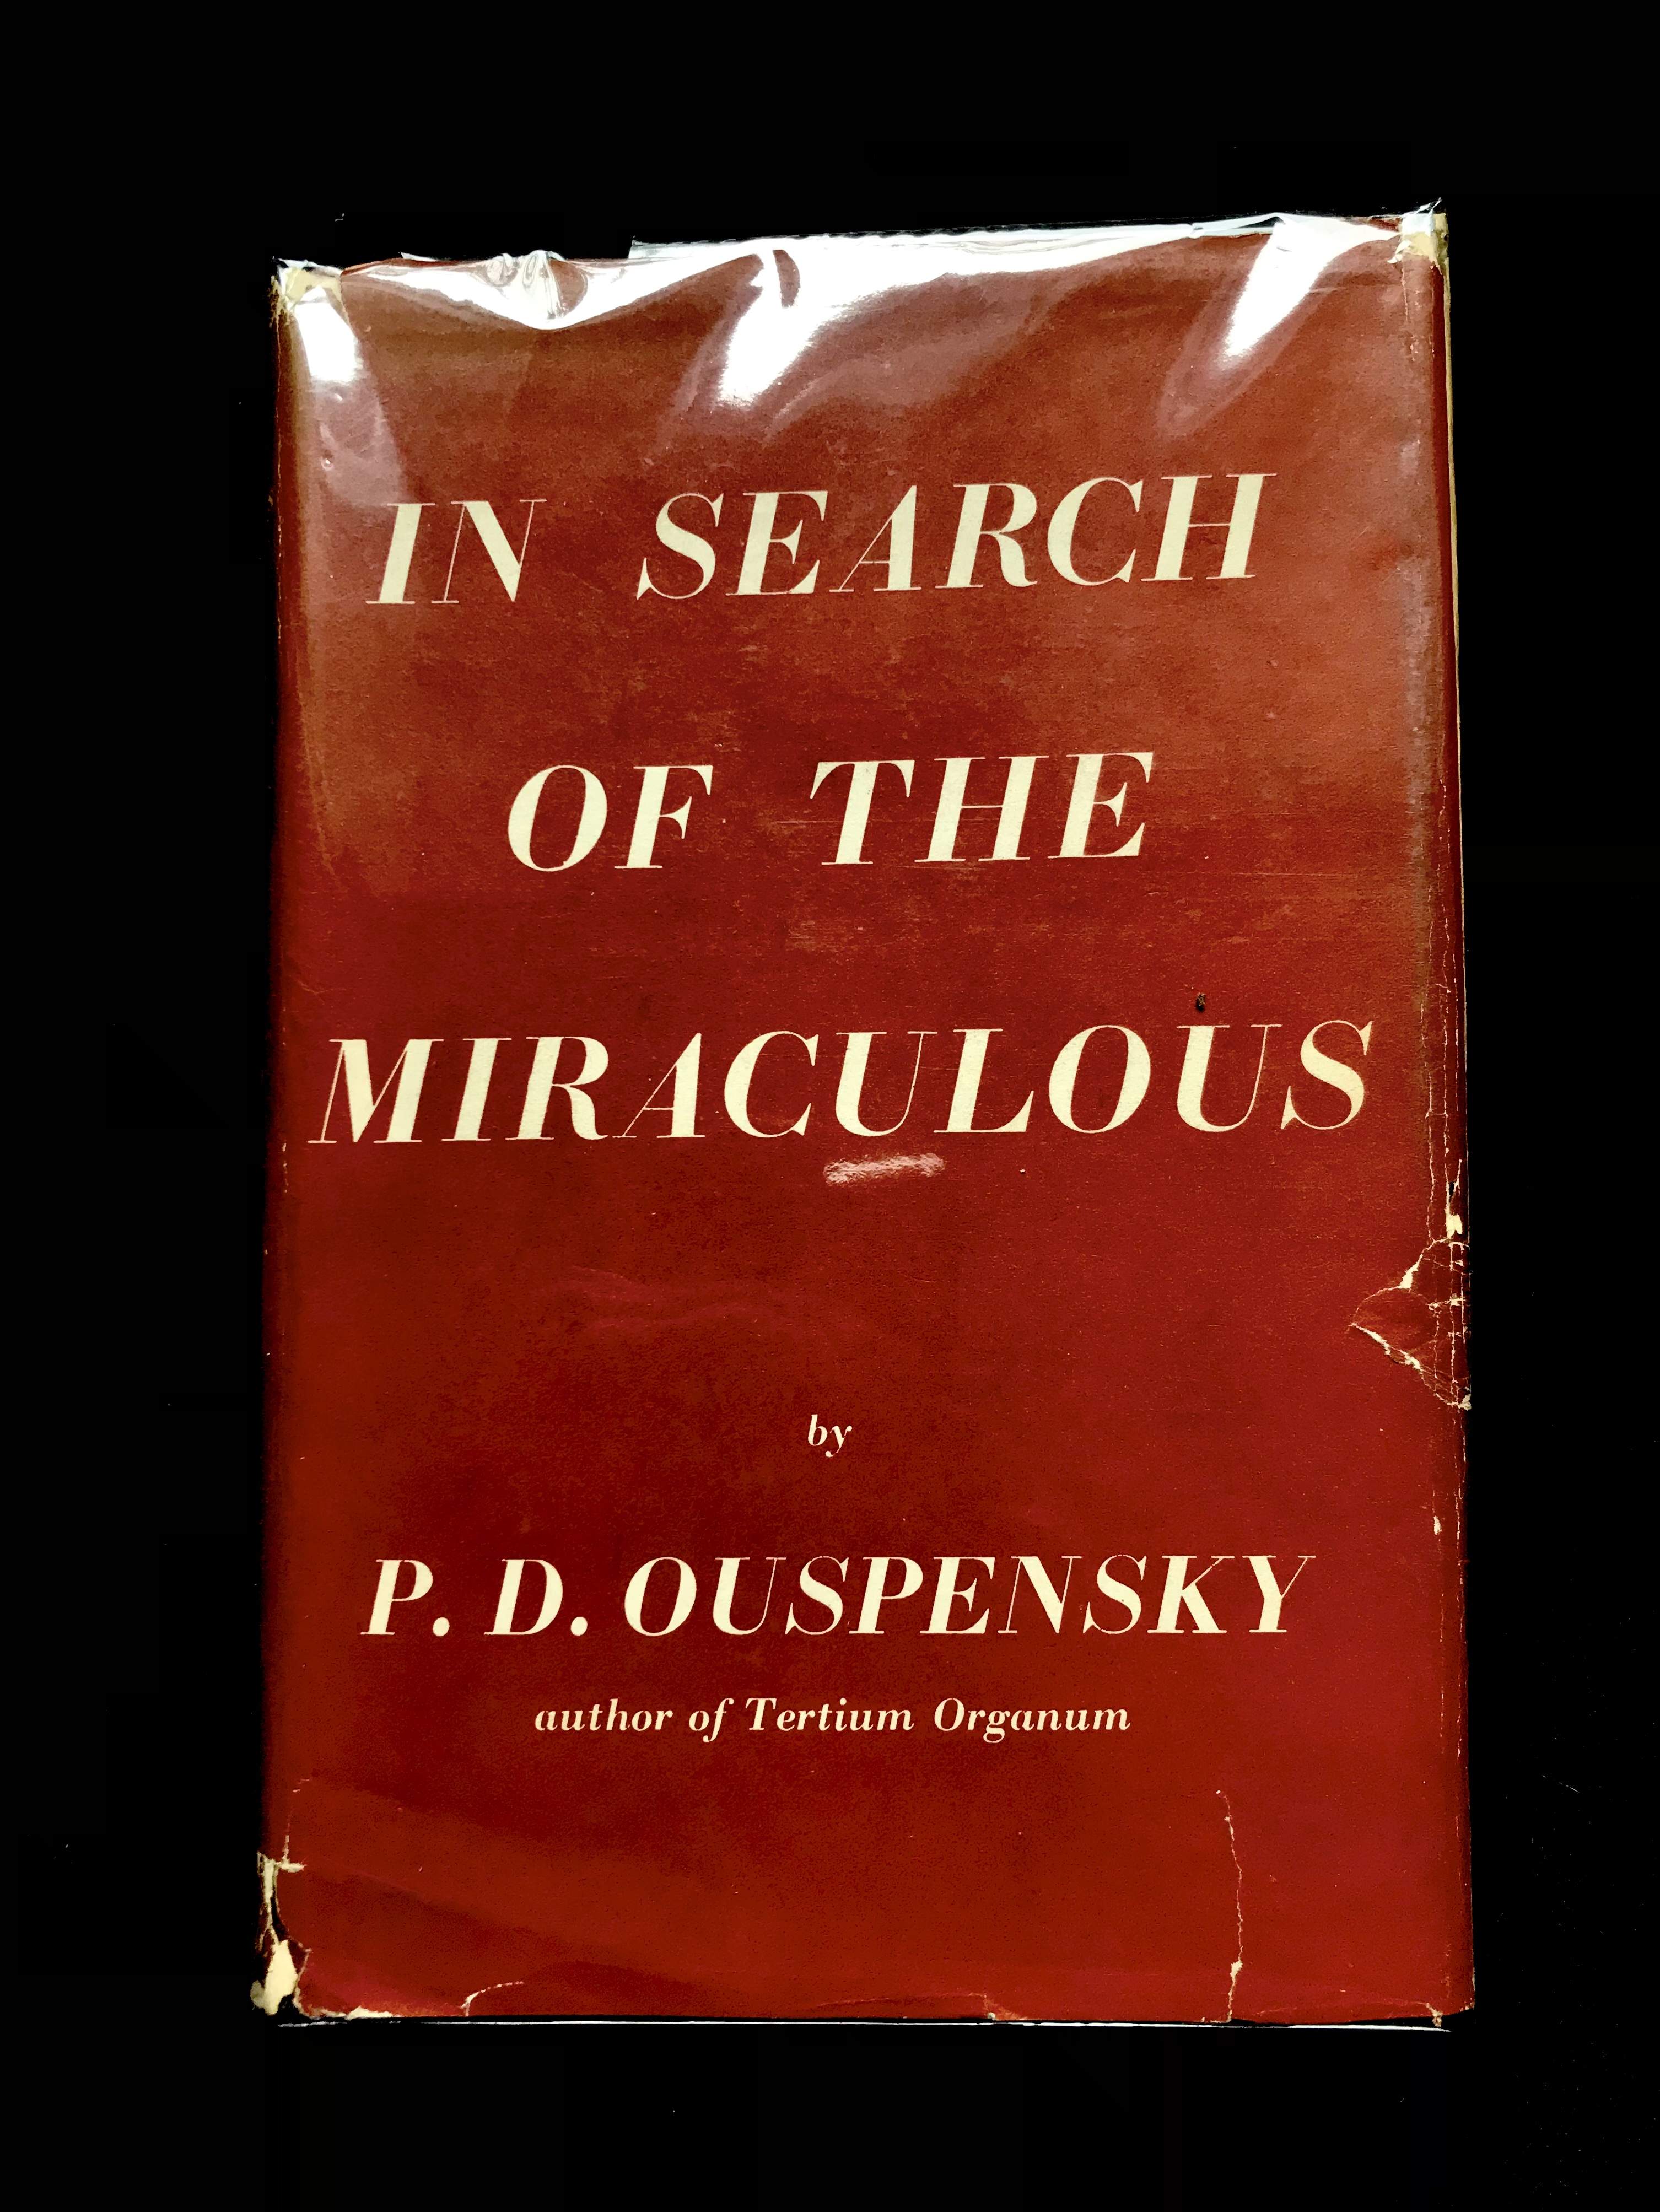 In Search Of The Miraculous: Fragments Of An Unknown Teaching by P. D. Ouspensky